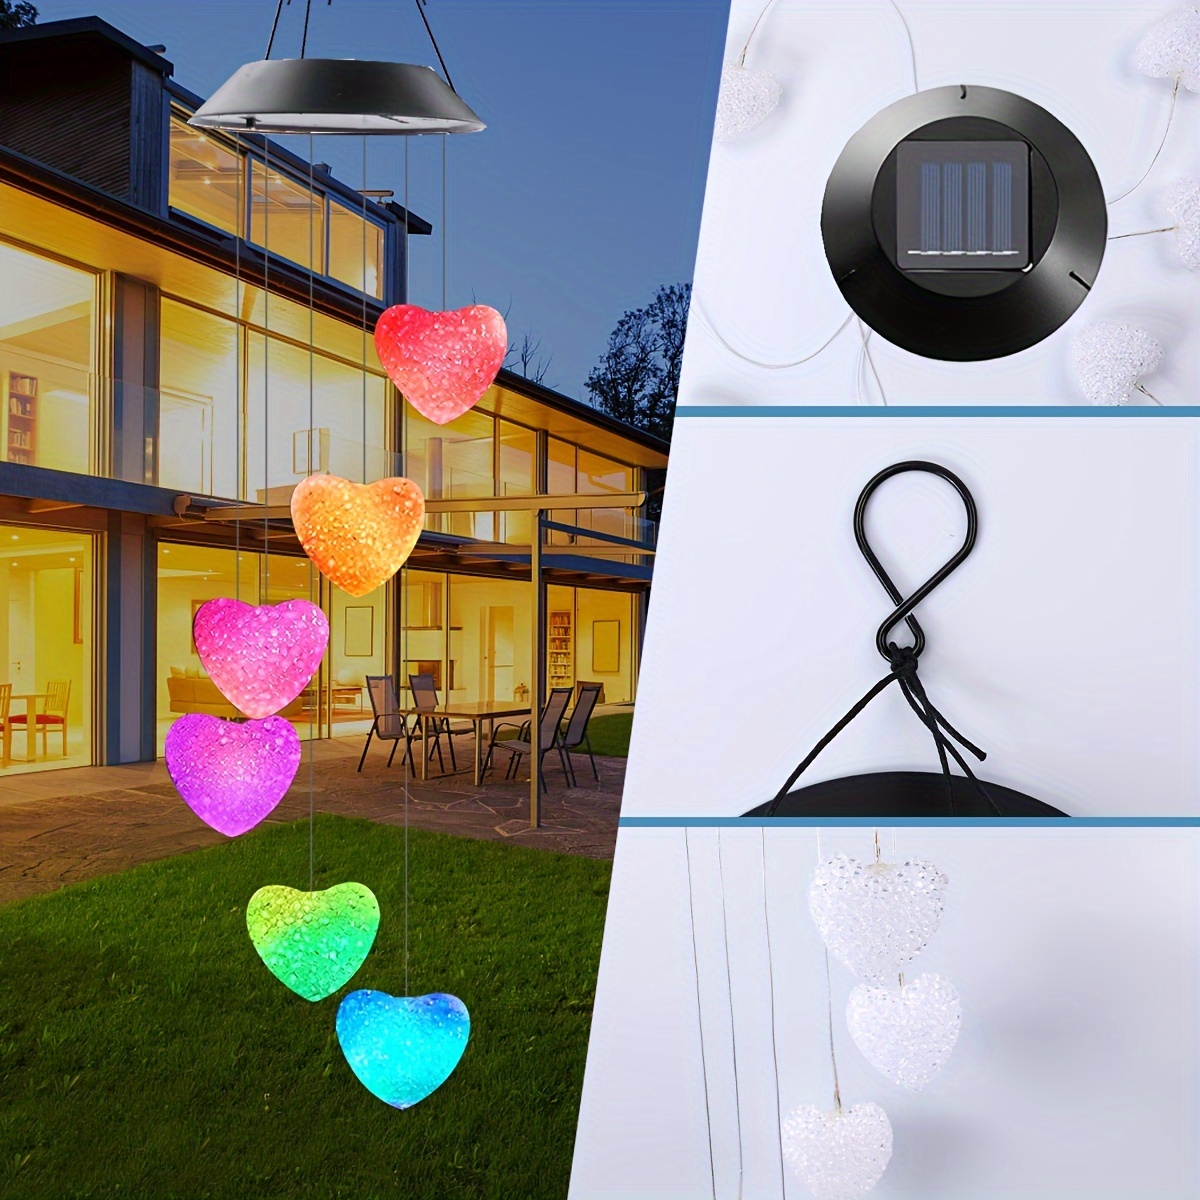 

Charming Heart-shaped Solar Wind Chimes With Color-changing Led Lights - Perfect Gift For Mom, Grandma, Wife, Aunt, Sister - Unique Outdoor Garden Decor By Ganges Sa